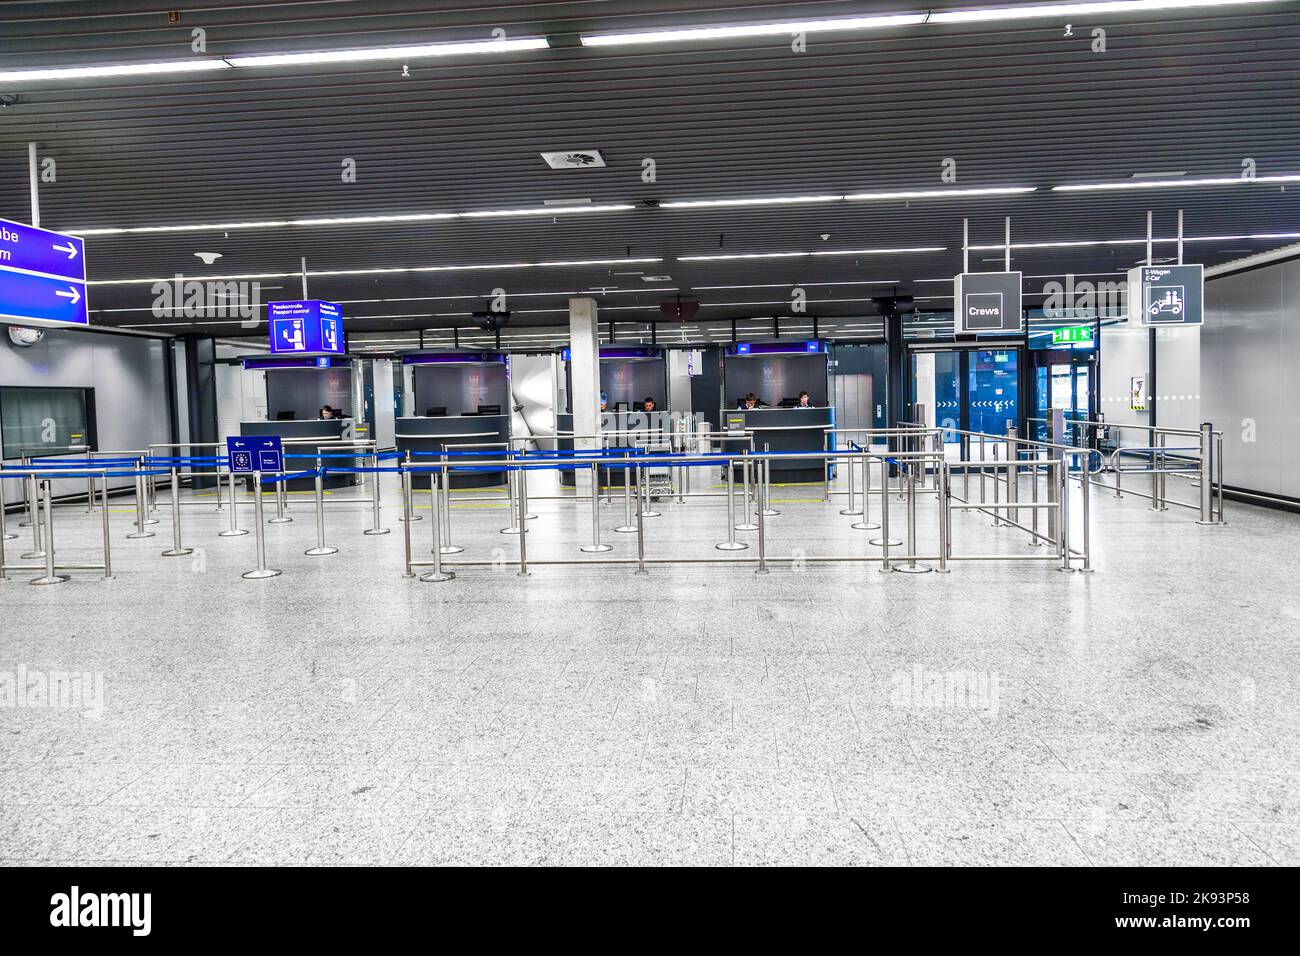 FRANKFURT, GERMANY - JUNE 8: The early shift of border control police waits for passengers in Terminal 1 at Frankfurt Rhein Main airport Gate C to che Stock Photo